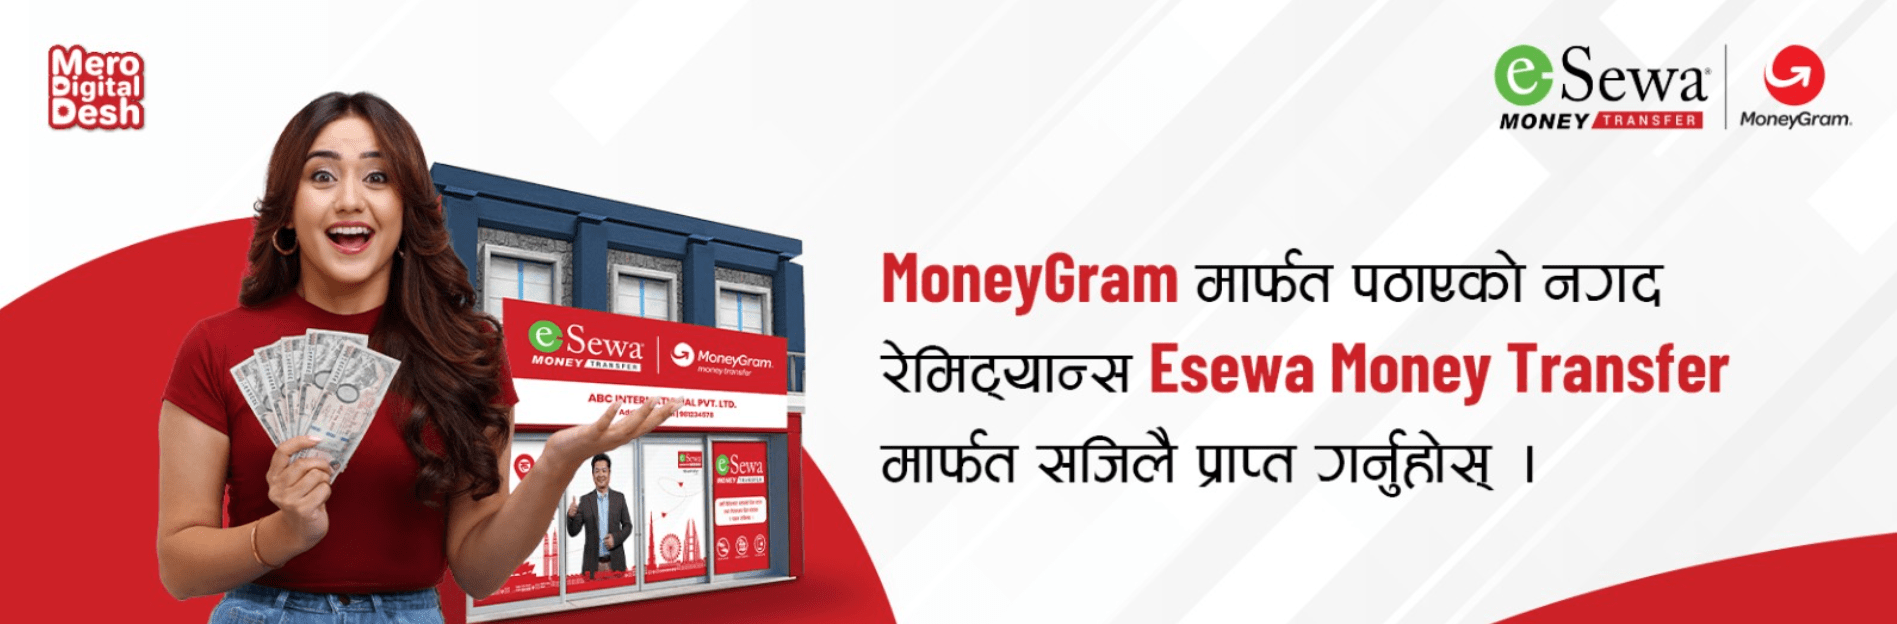 MoneyGram Expands Cash Payout Service in Nepal with Esewa Money Transfer